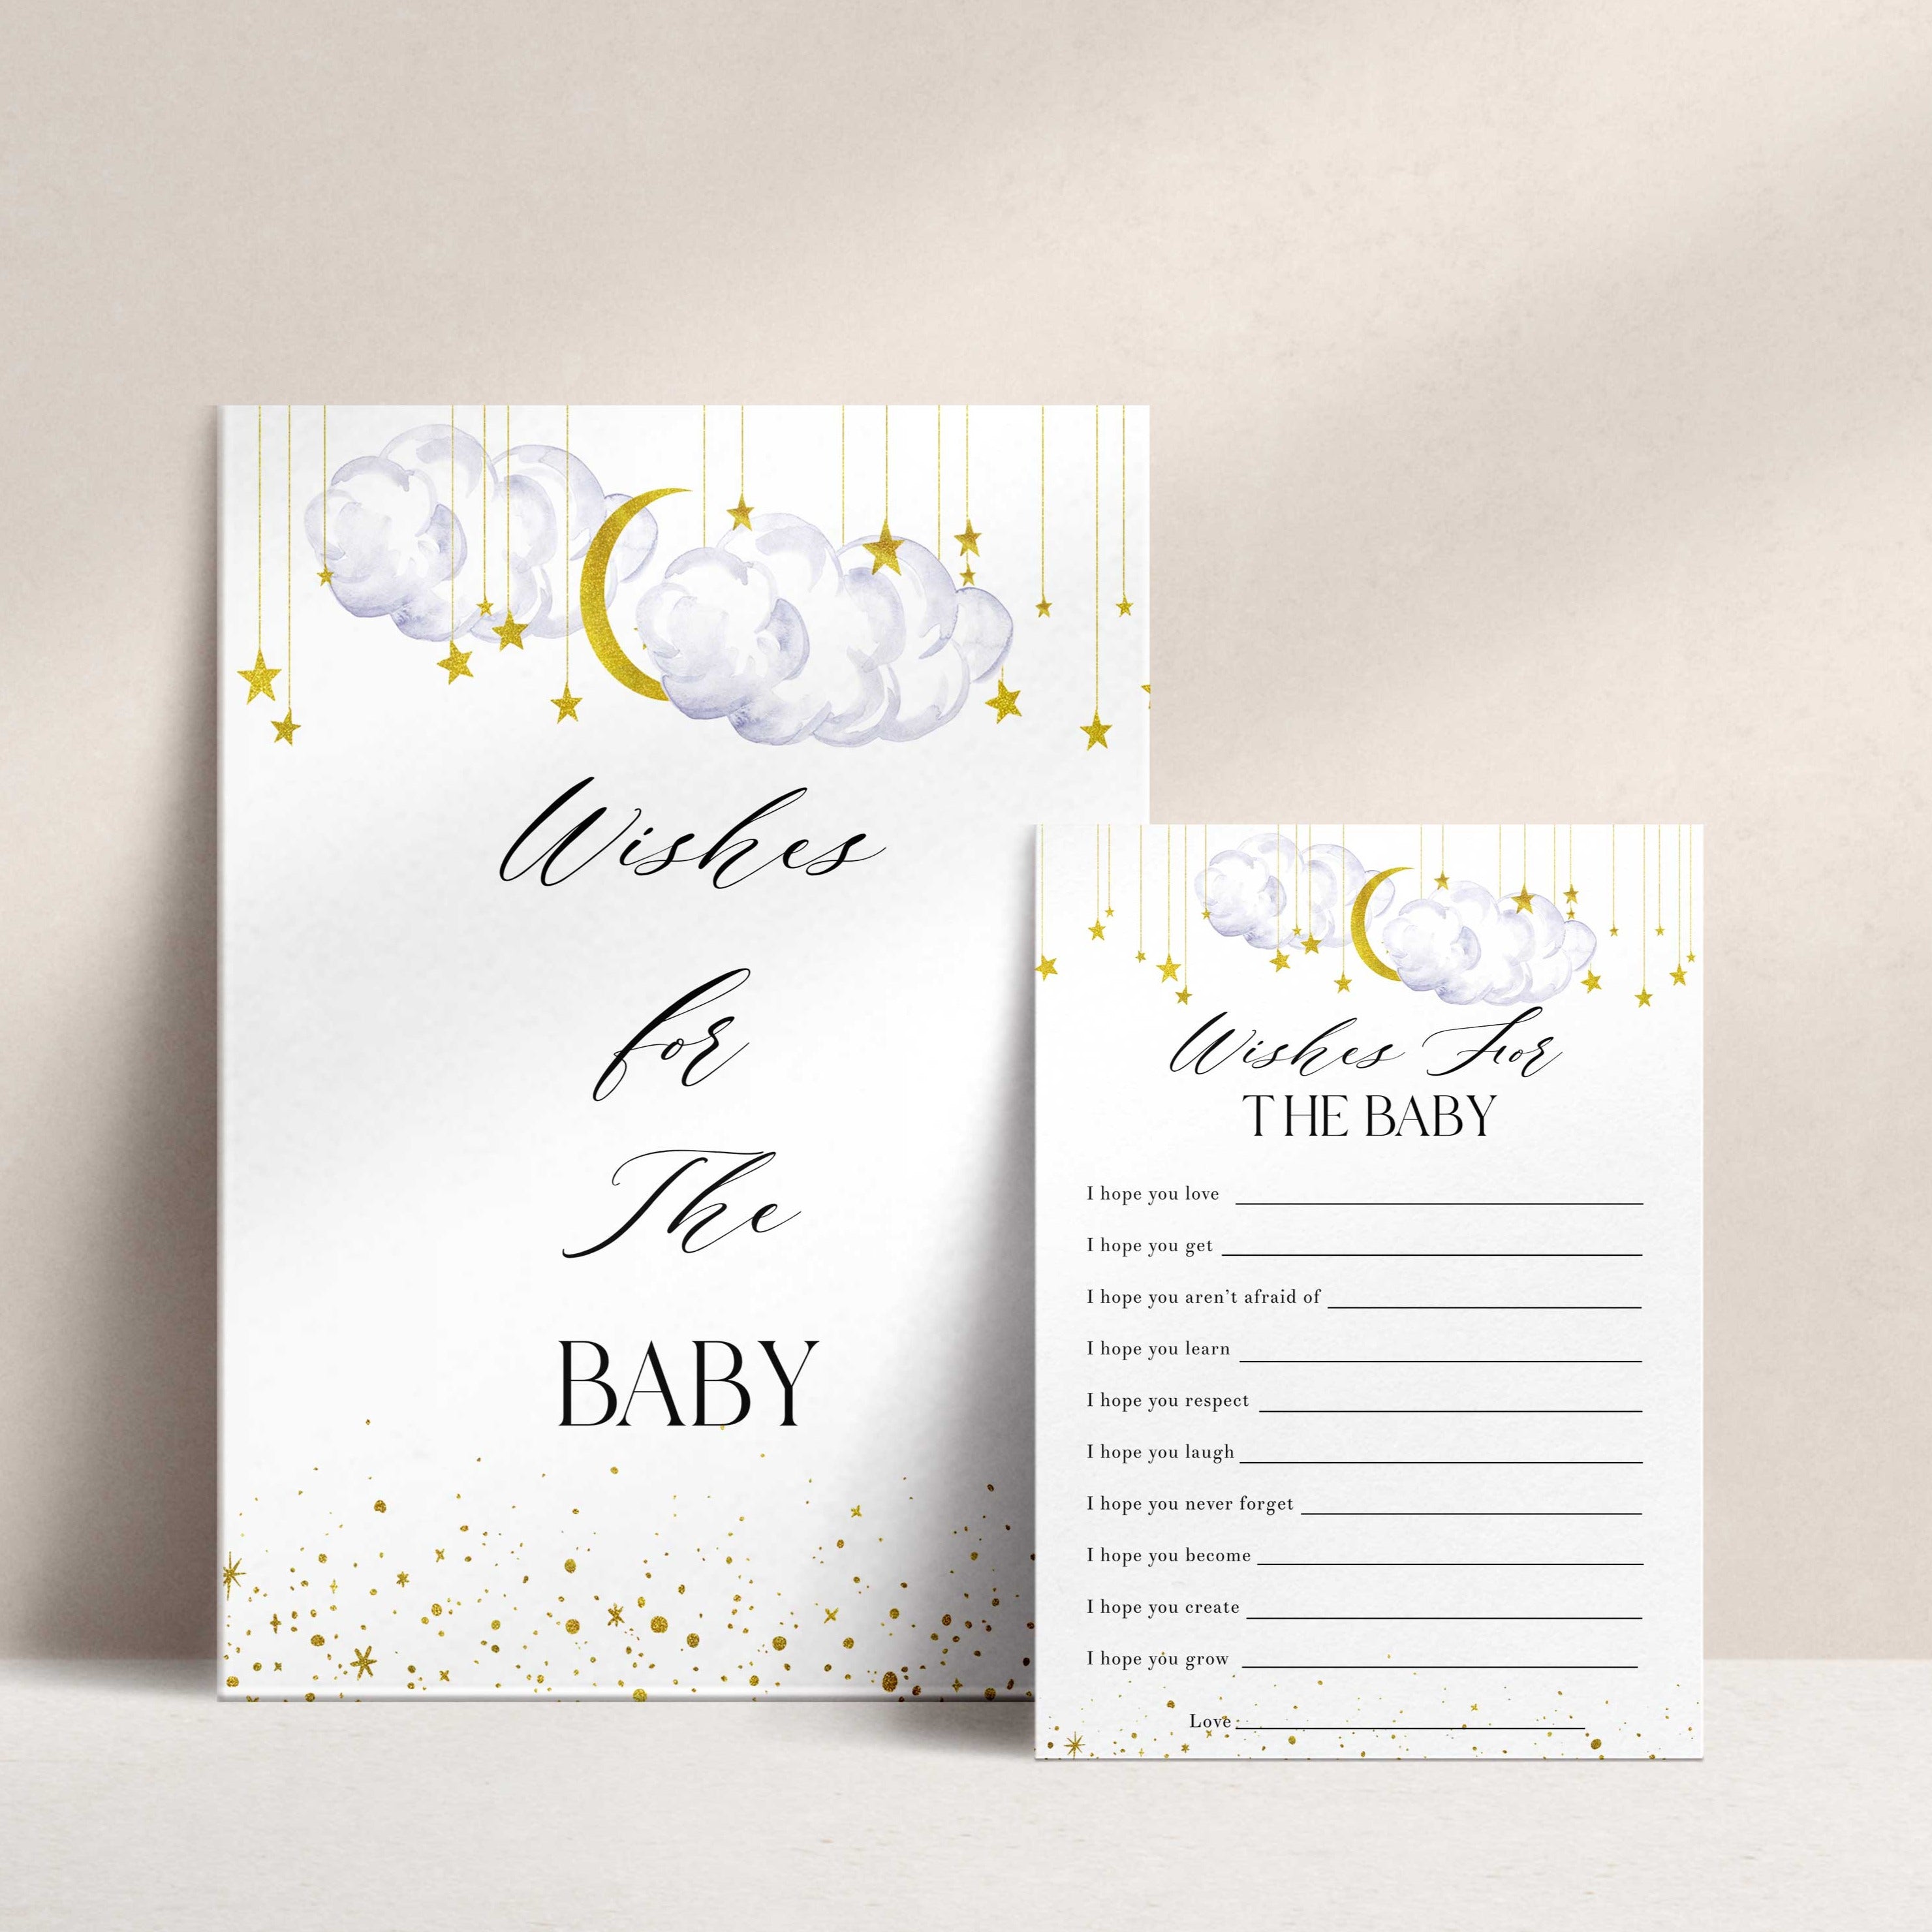 Baby Sprinkle Party Printables - My Party Design